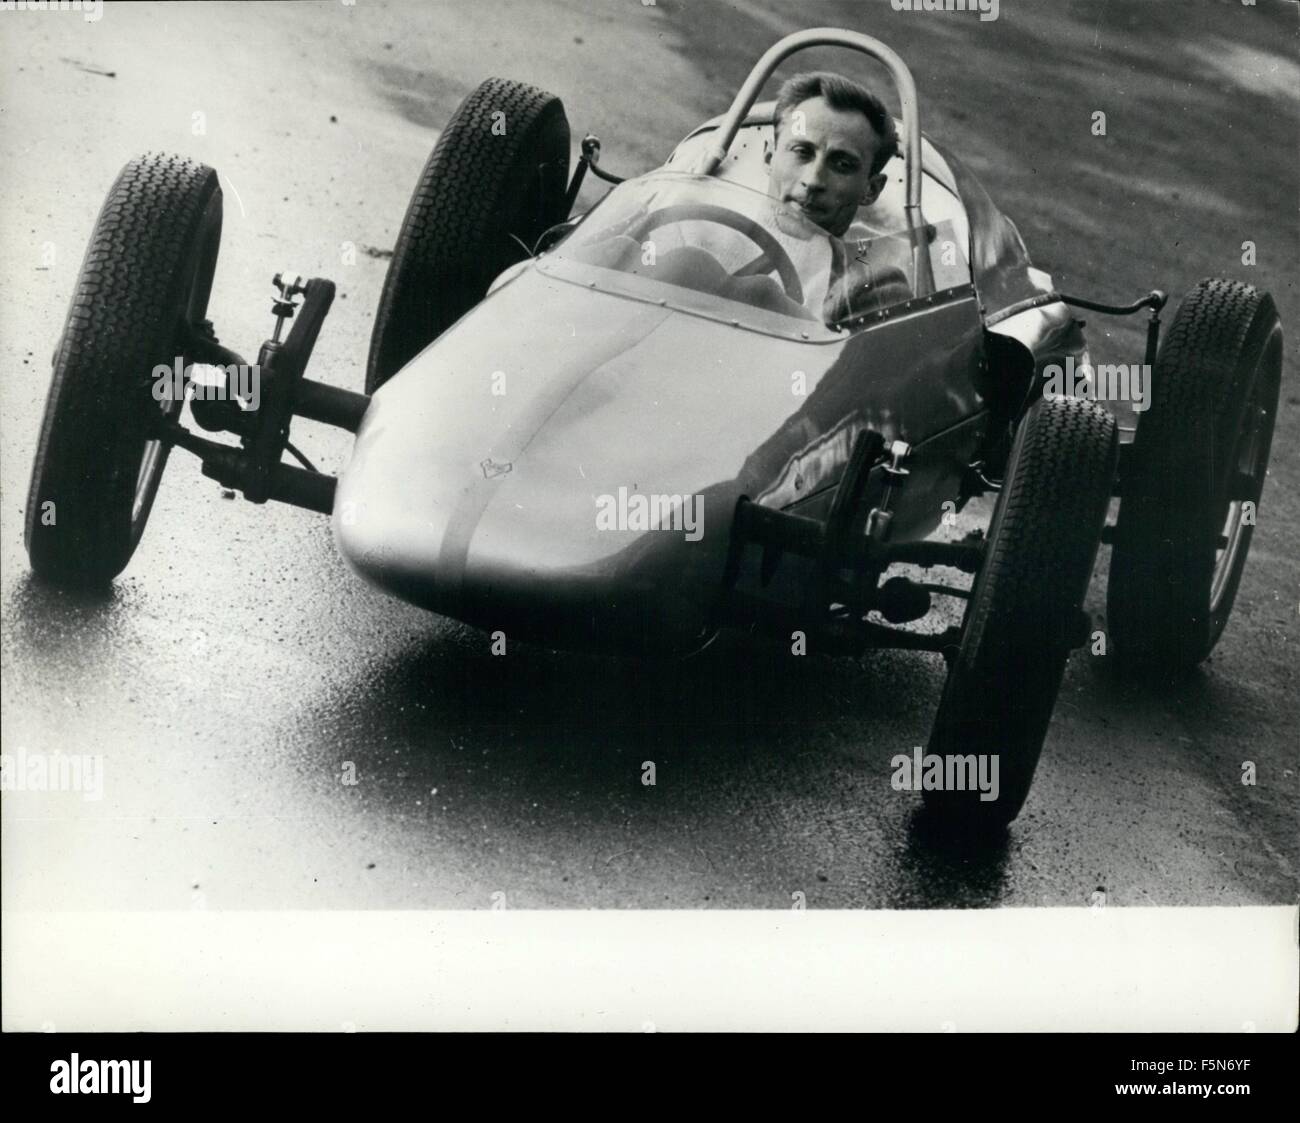 1966 - Latest German Racing Car: This is latest model o the ''Tuchs Formula V'' racing car. At the wheel is designer Heinz Fuchs, from Stuttgart Leonberg, Germany. In 1966, Fuchs designed and manufactured 50 racing cars of the formula V type; he is the Cray German manufacturer of racing cars and the biggest manufacturer in Europe if ''Formula V'' racing cars. The latest model has been perfected and the bodywork create not only is of fiberglass.Fuchs managed to create not only the most elegant5 looking racing car of this class, and therefore superior to other cars at fast race meeting. Price of Stock Photo